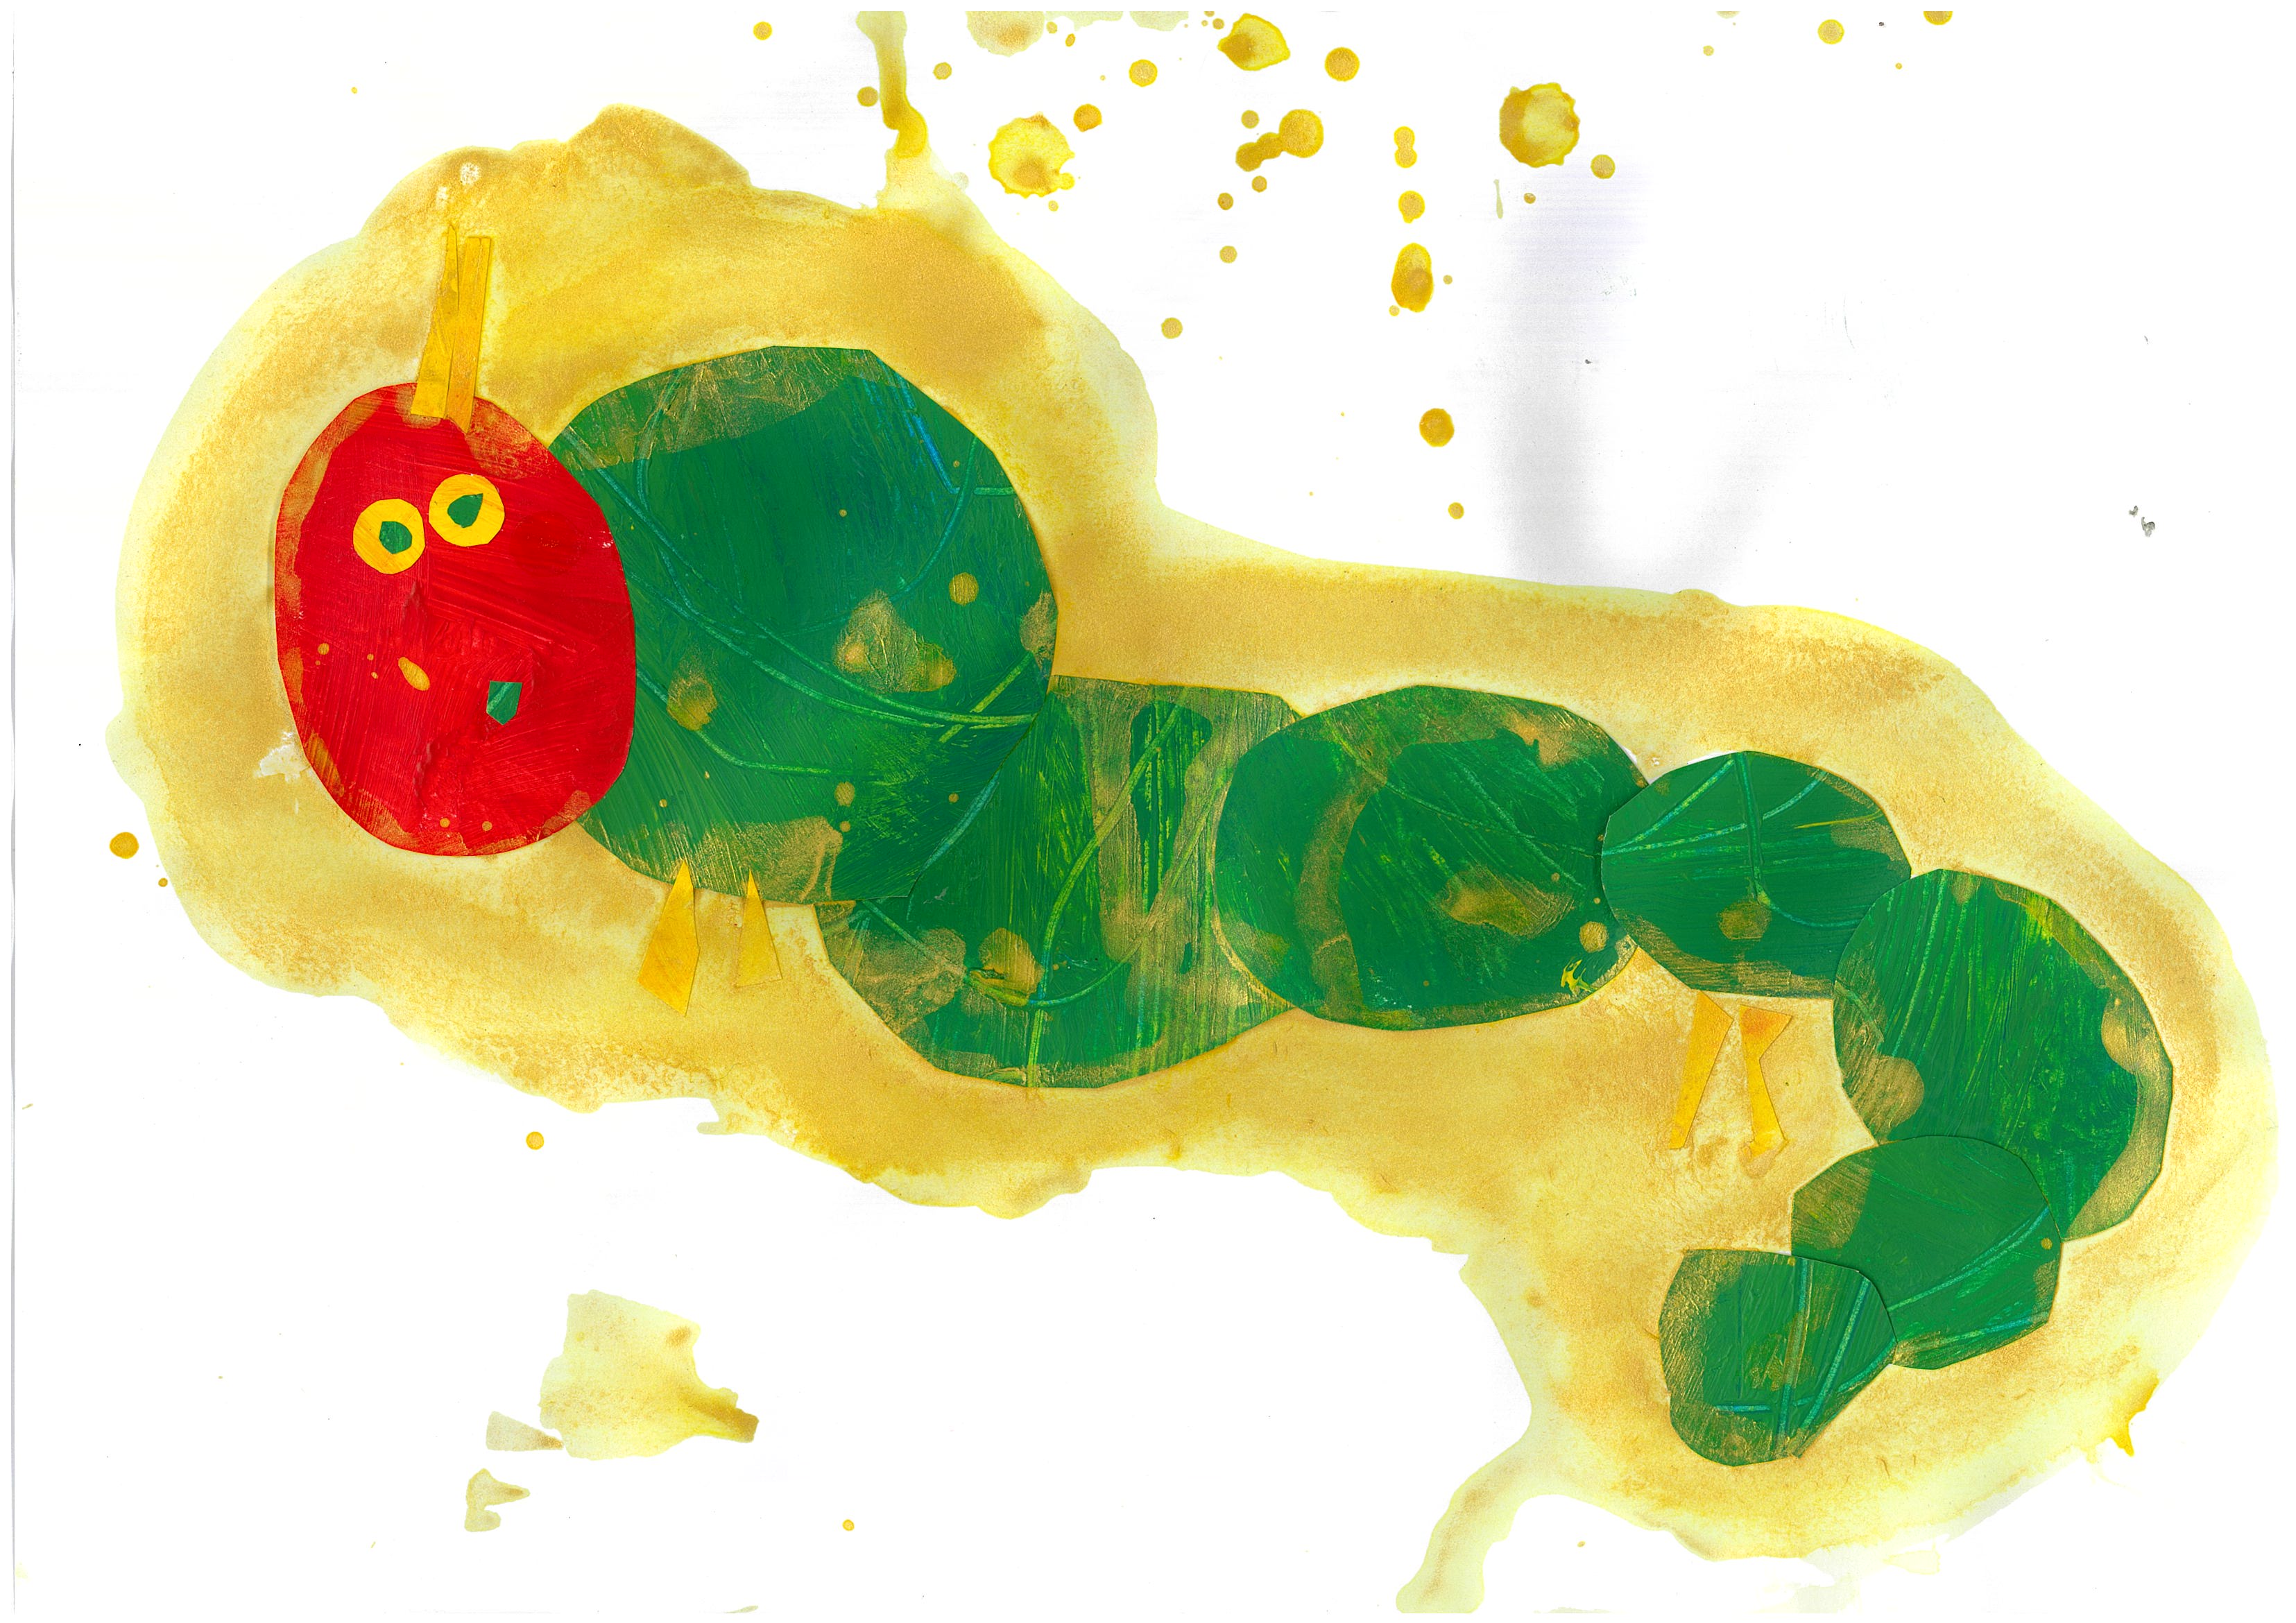 a student artwork of a hungry caterpillar with a green body and a red head.